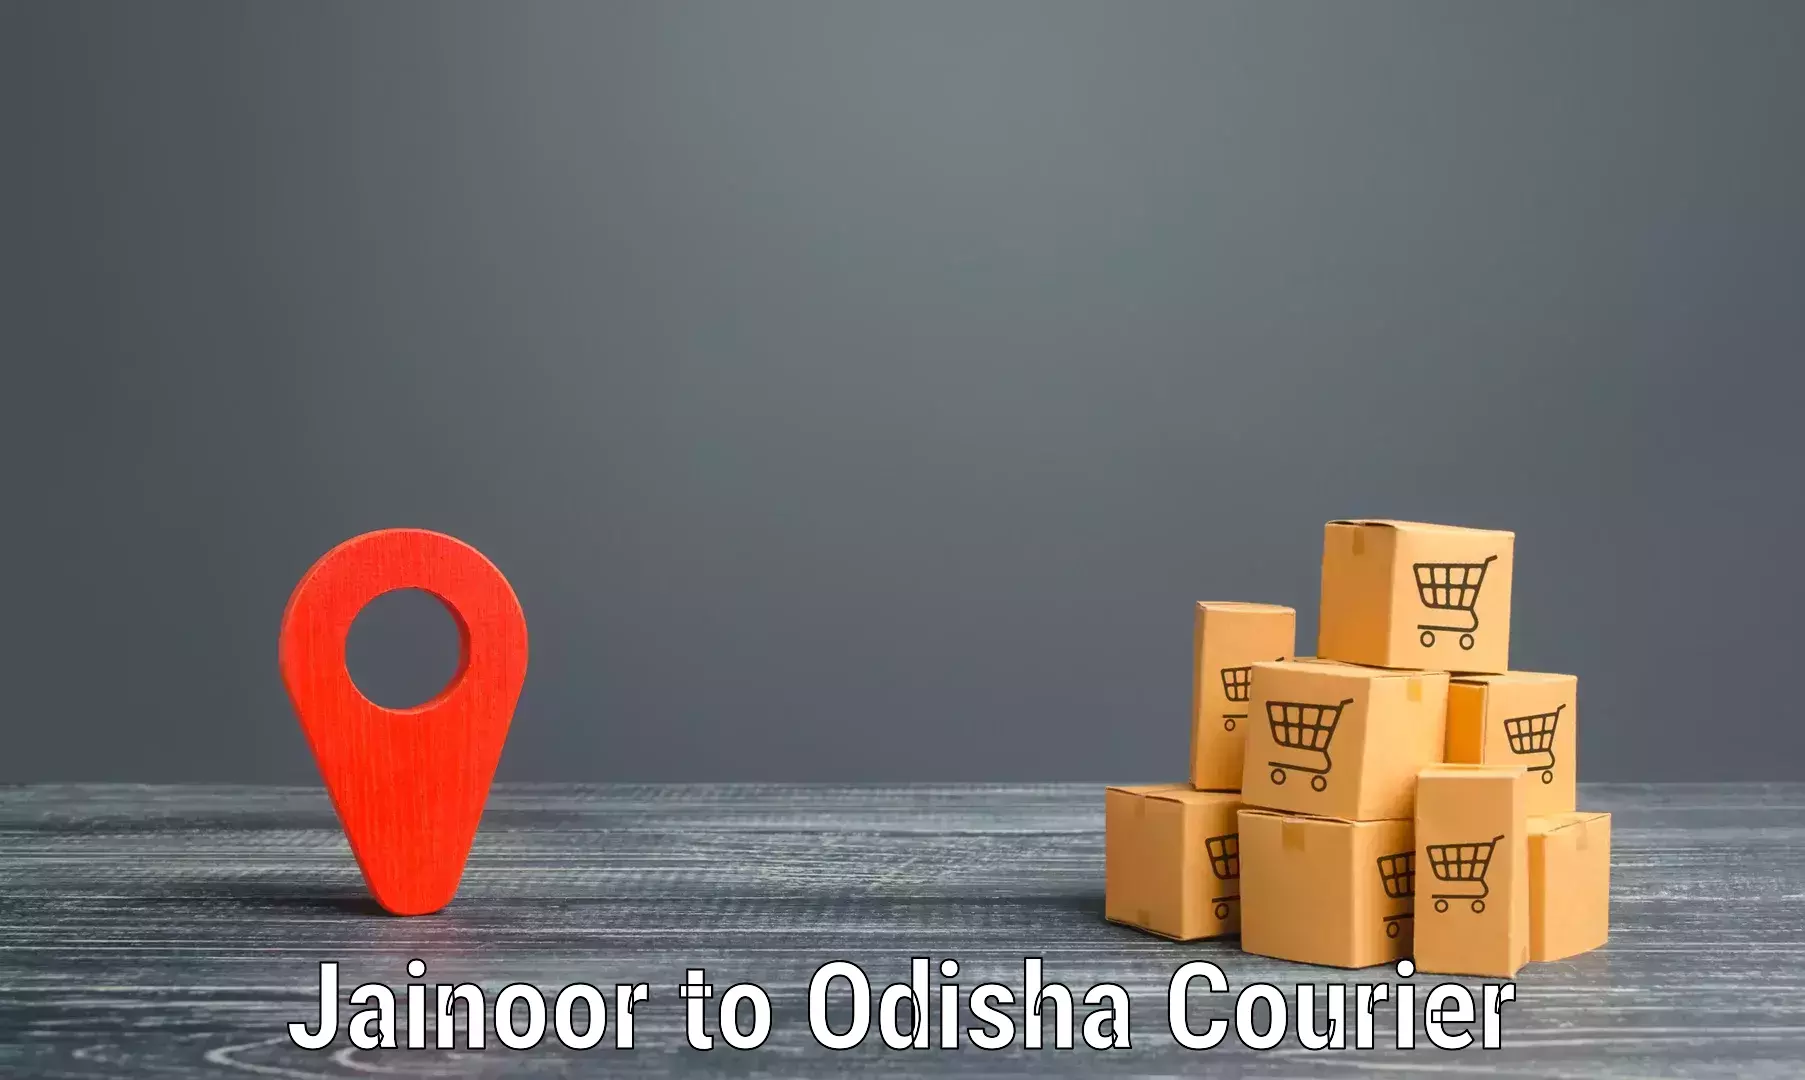 Comprehensive shipping services Jainoor to Anandapur